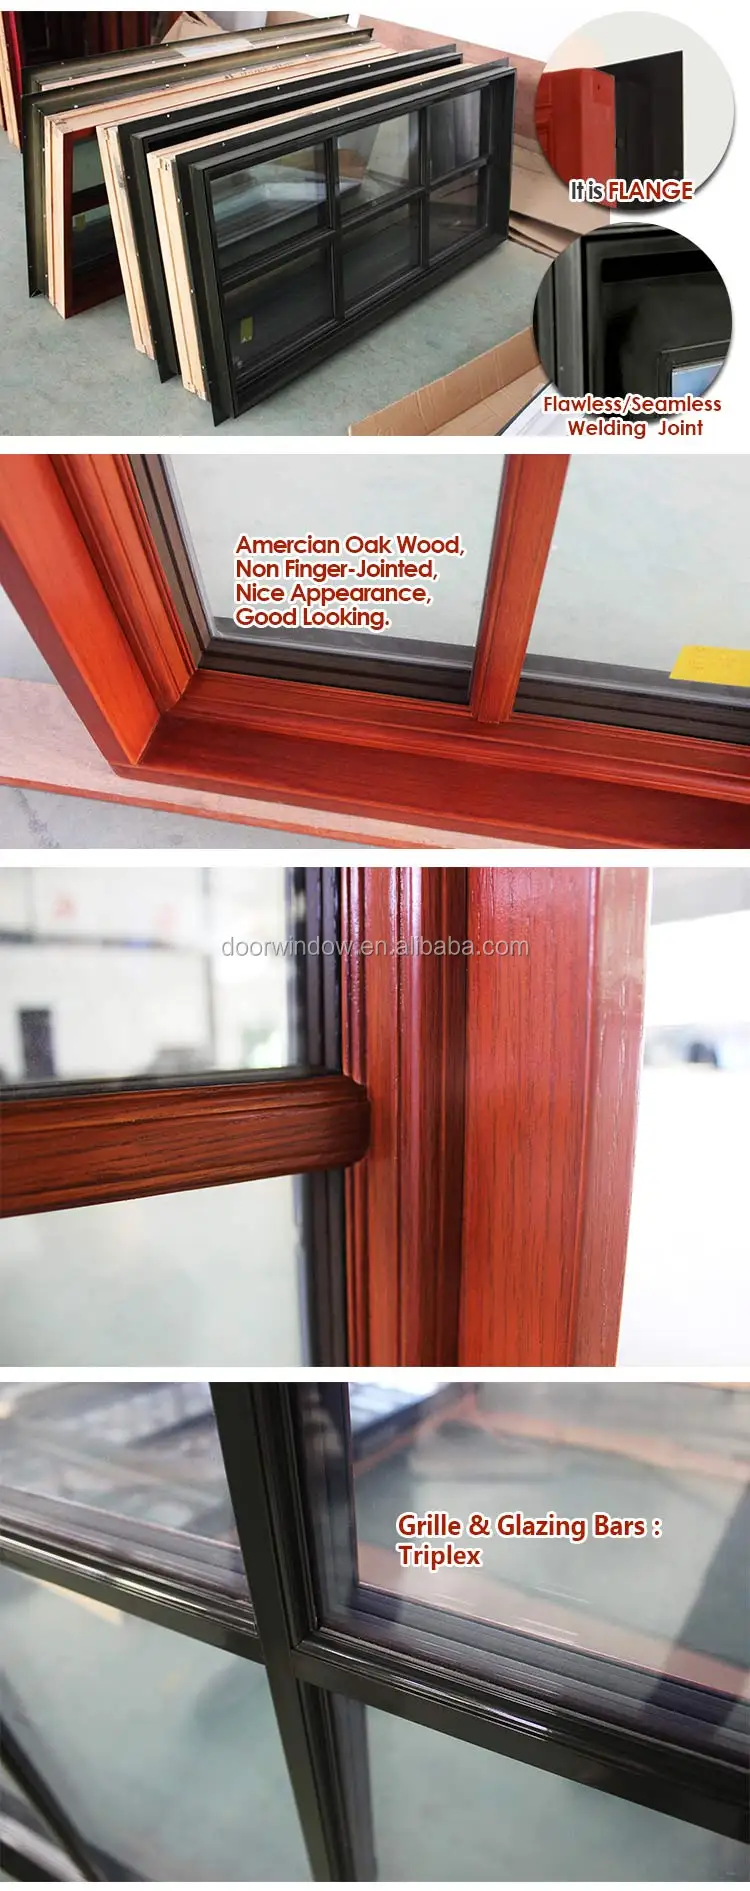 Wholesale price picture window replacement